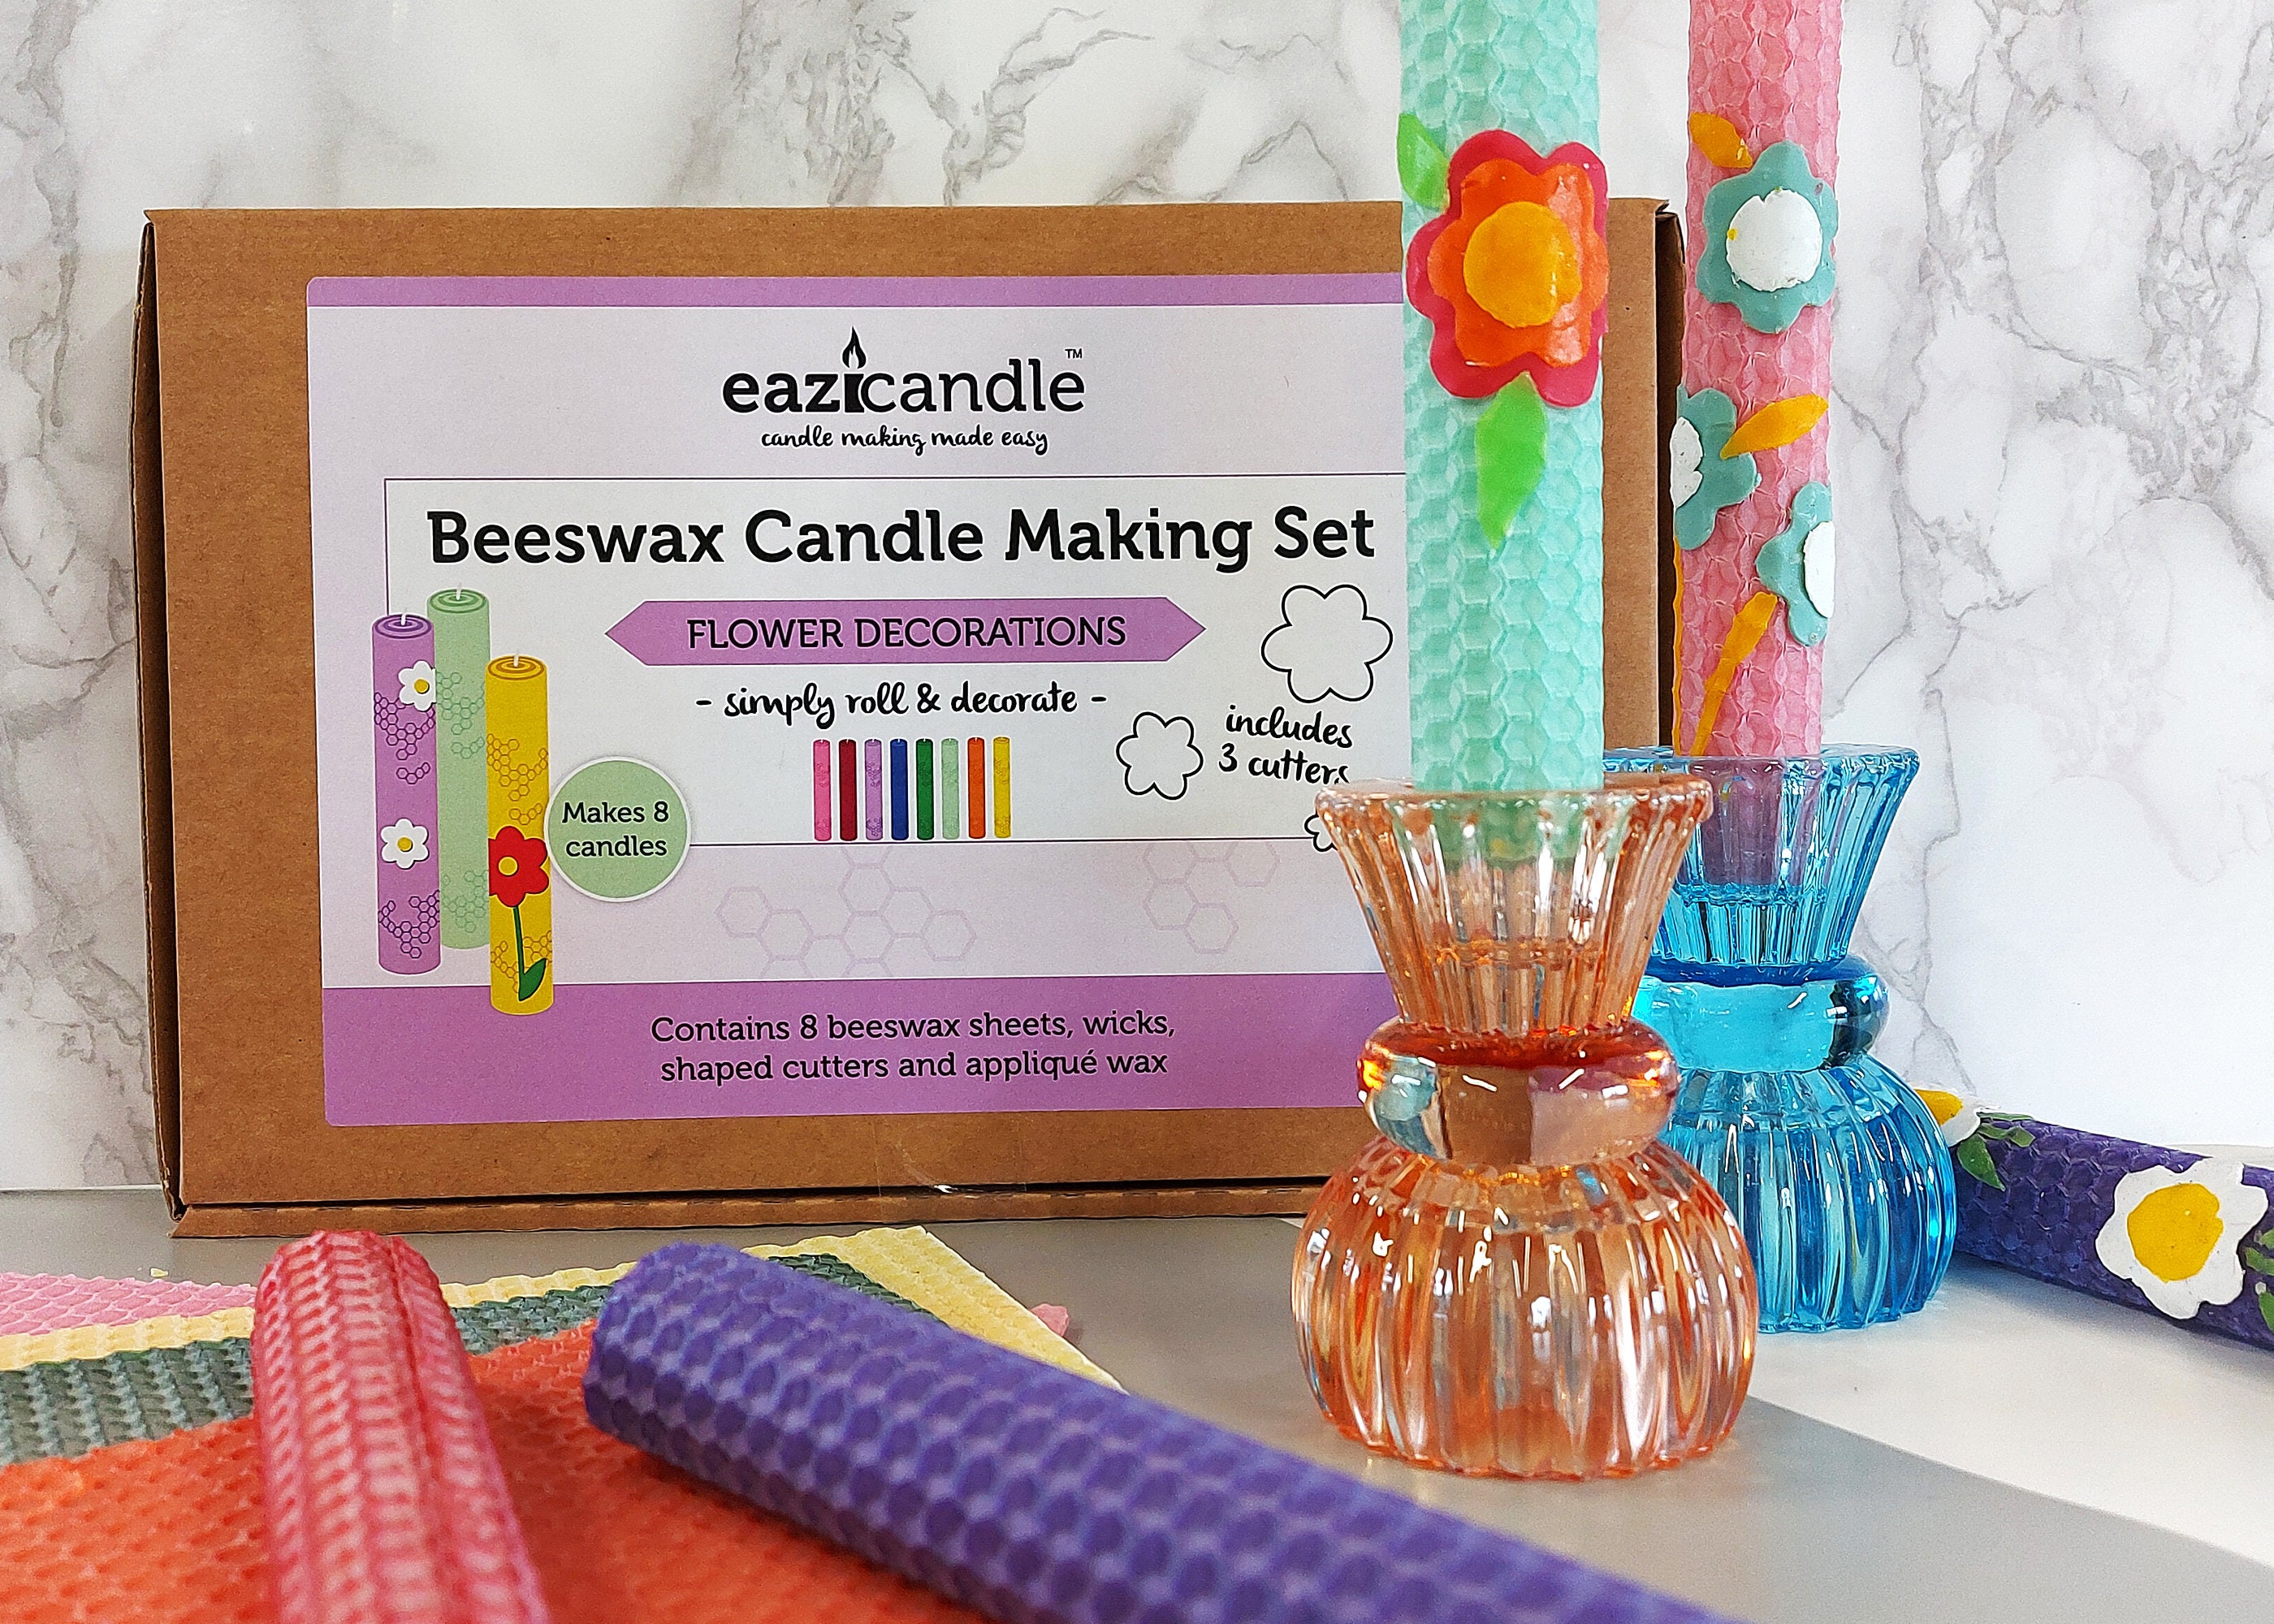 Eazicandle Beeswax Candle Making Kit Flowers Decorations Set 